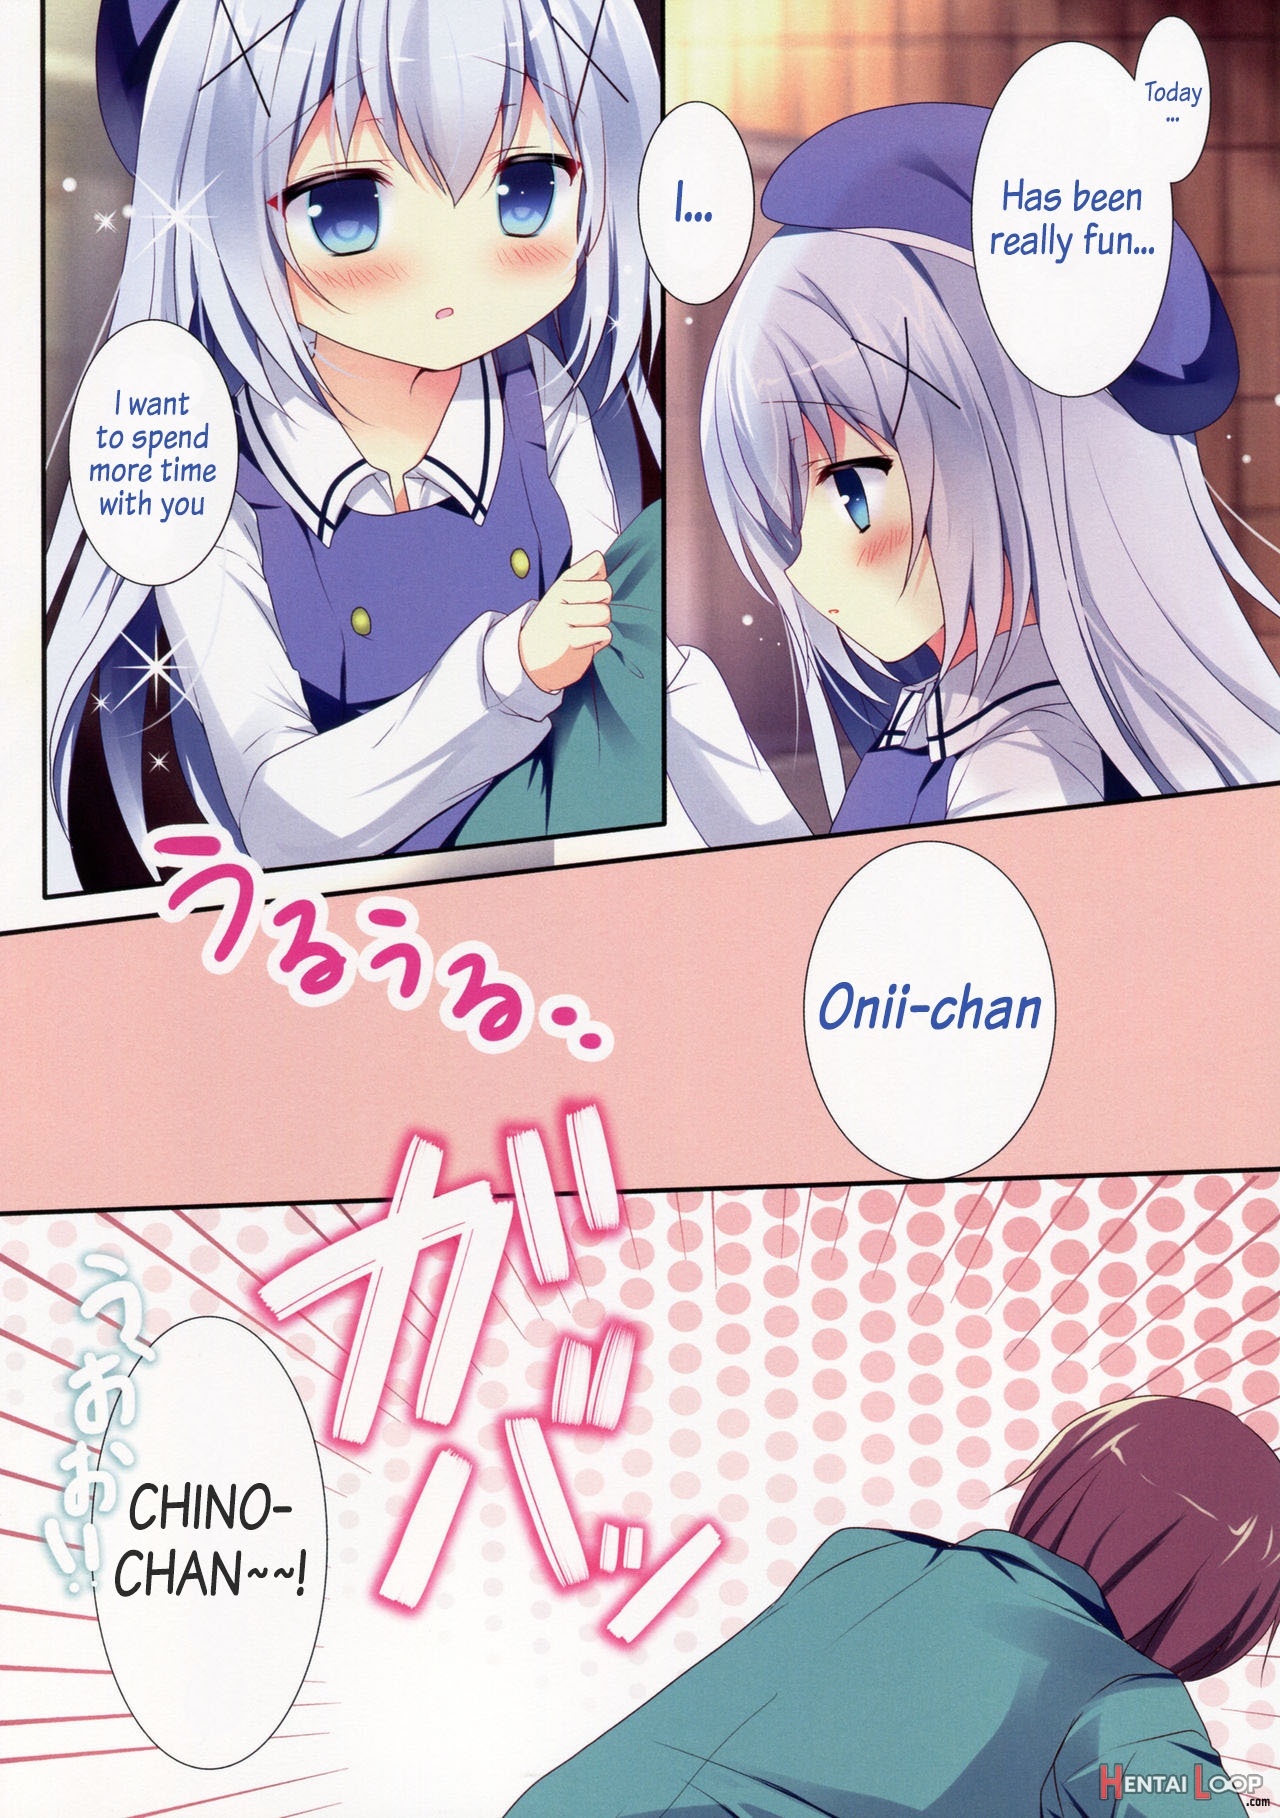 Horoyoi Chino-chan To page 5